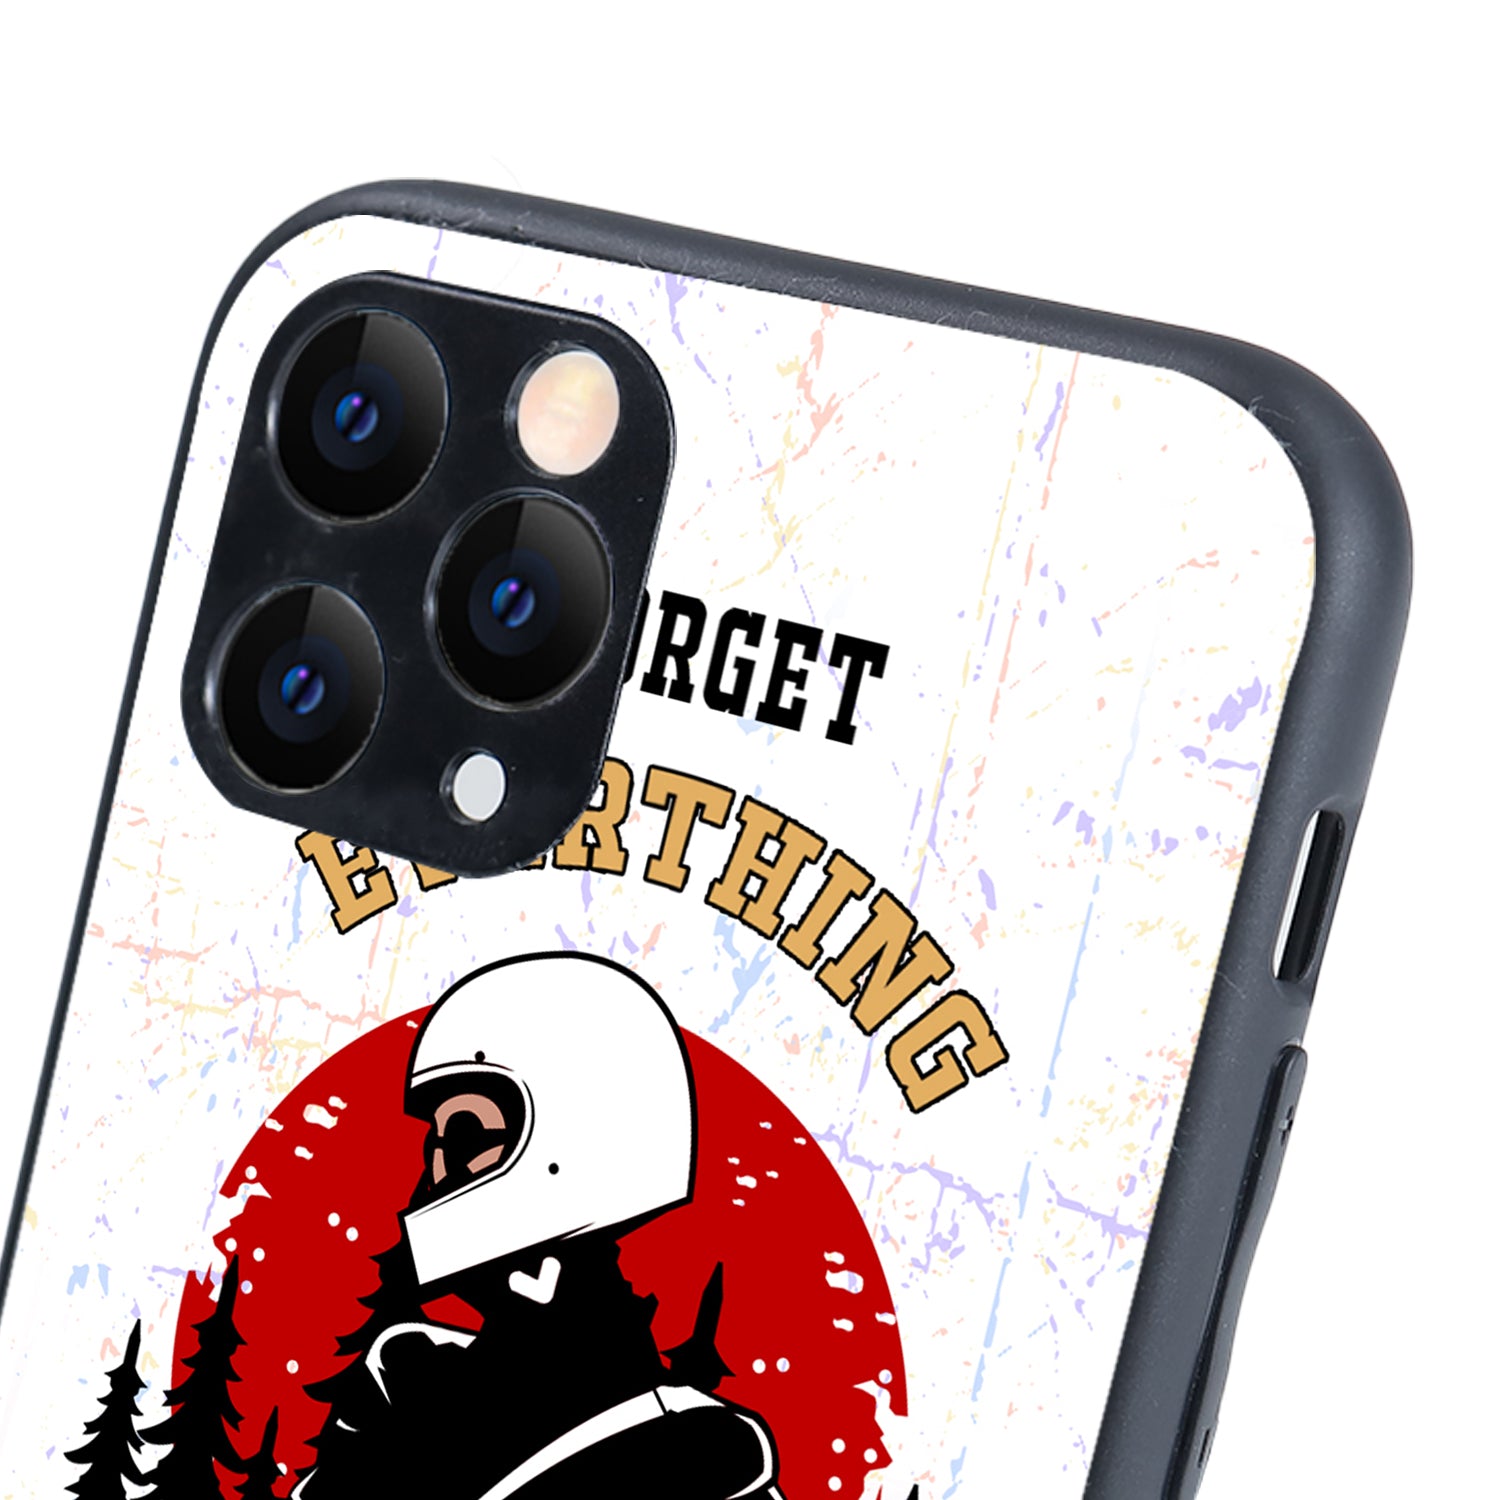 Forget Everything &amp; Ride Bike iPhone 11 Pro Case